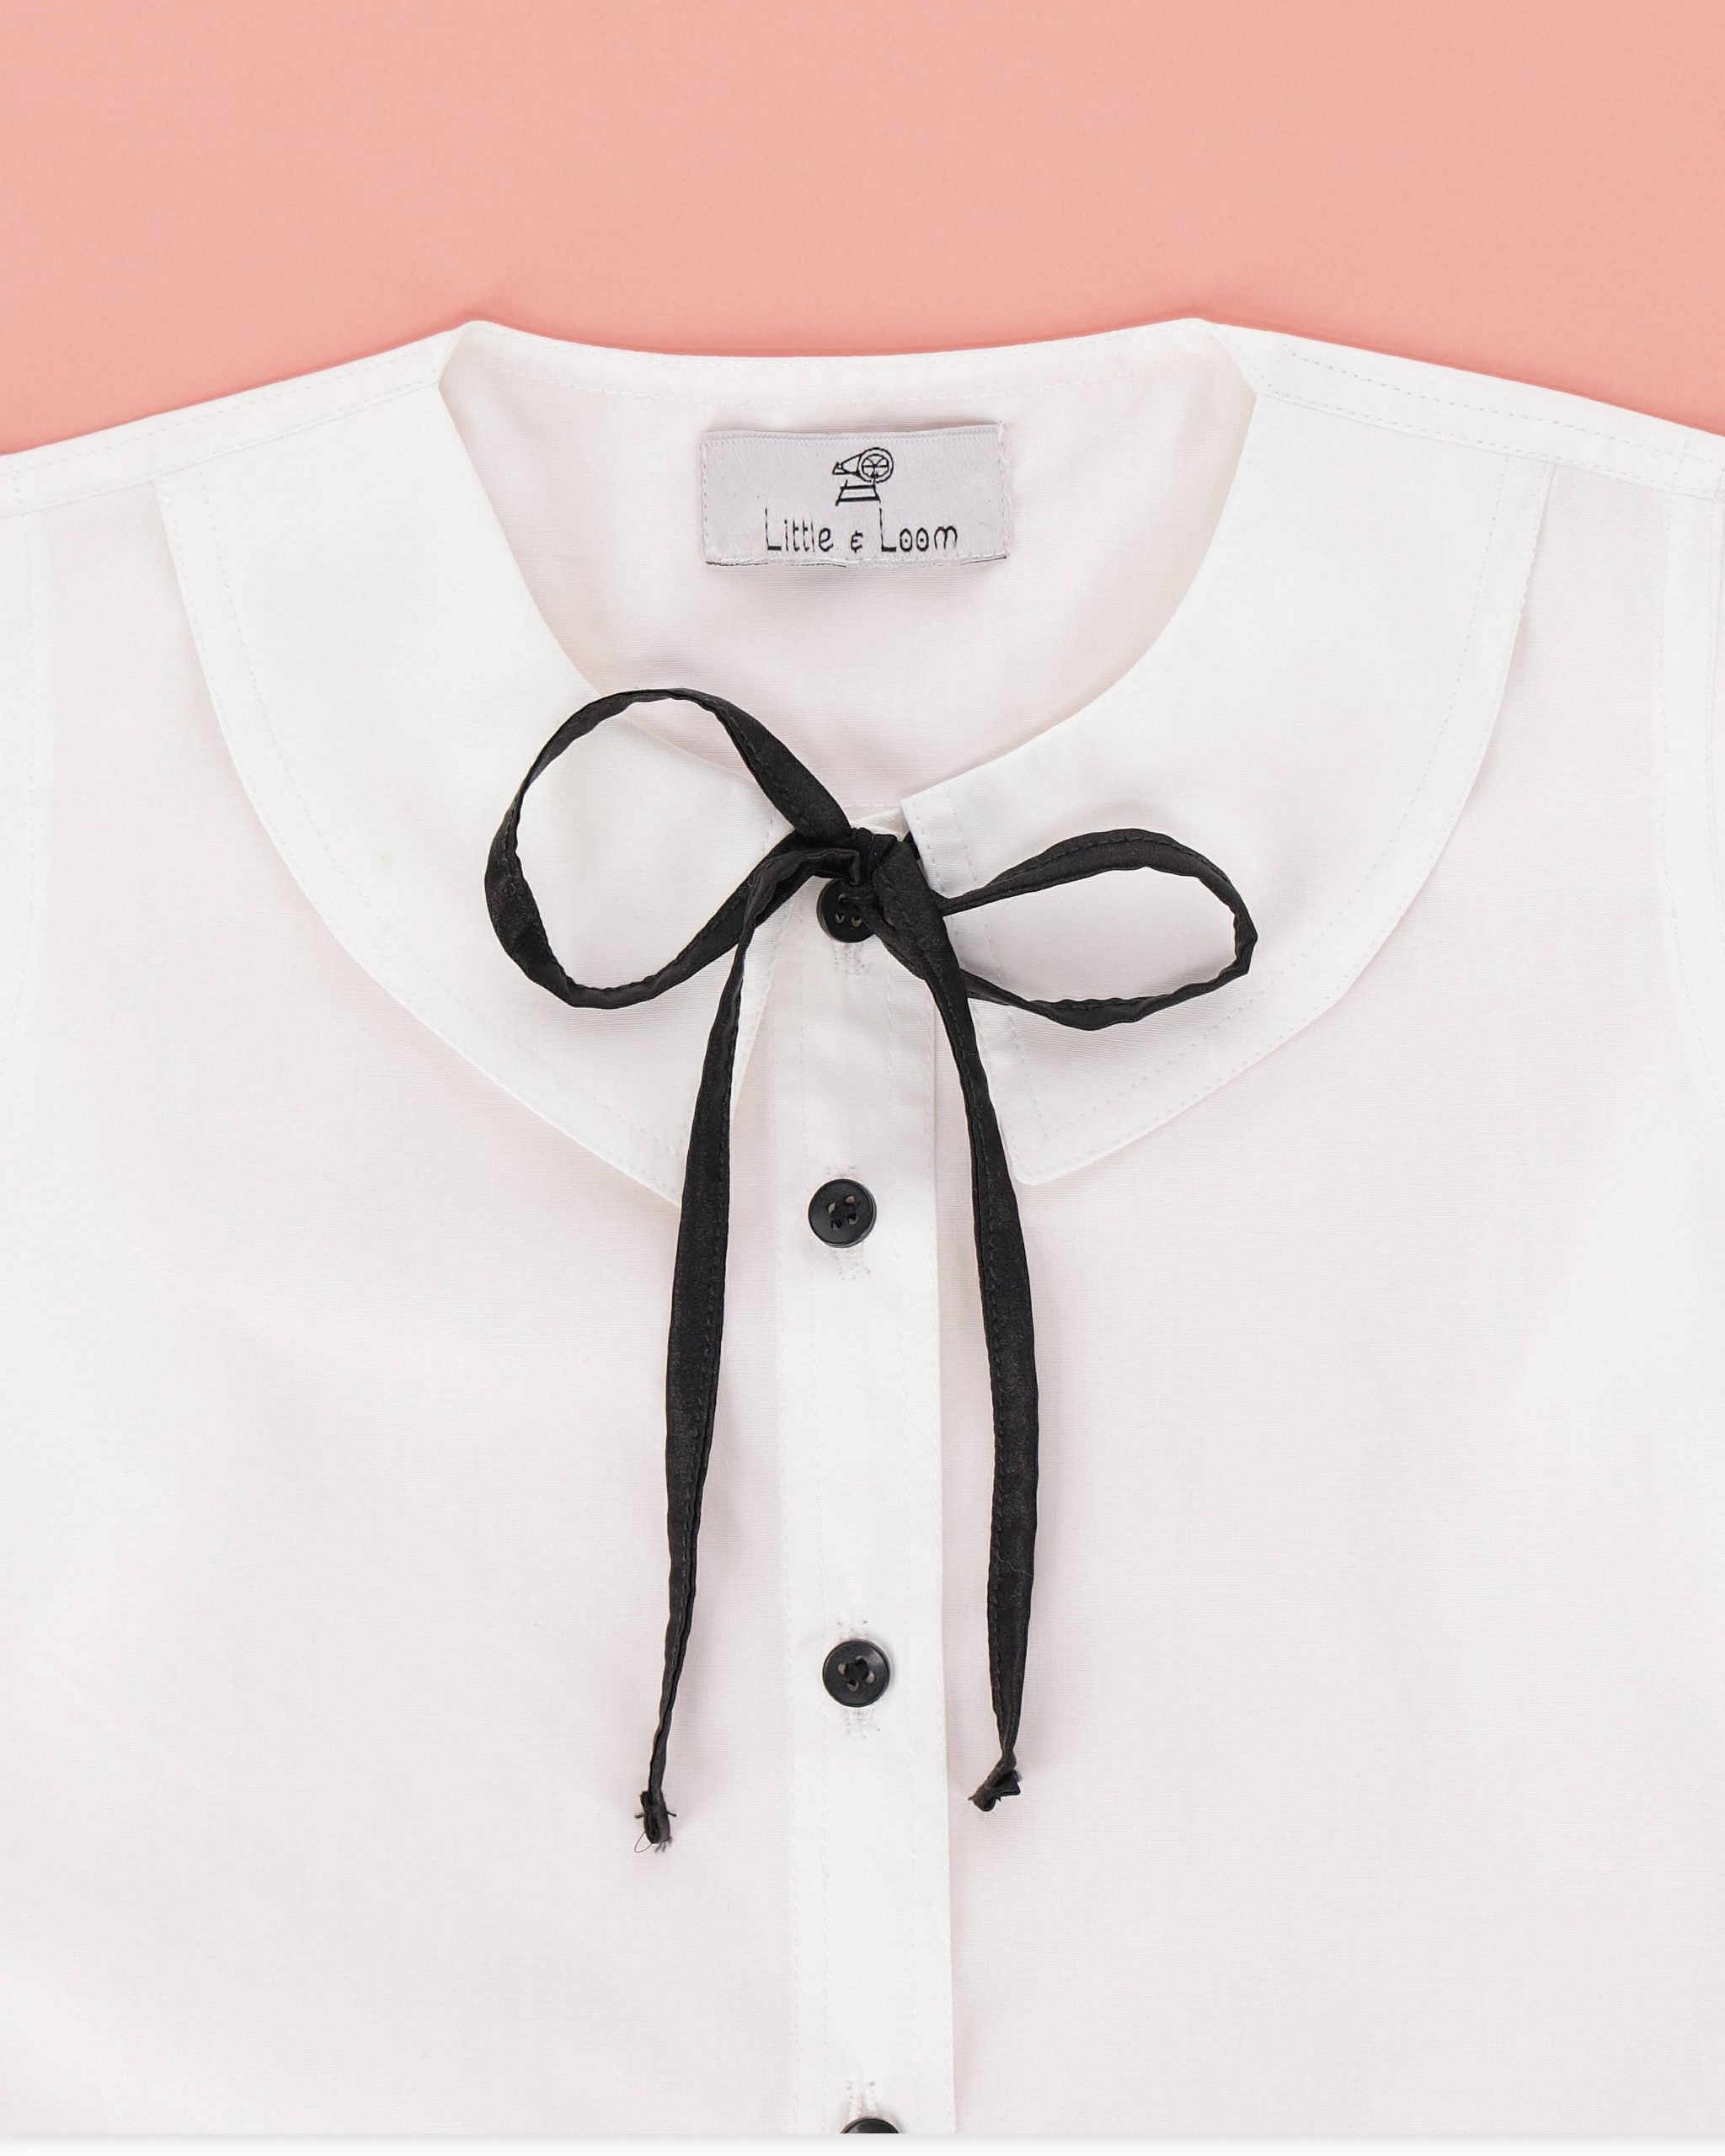 THE CLASSIC WHITE SHIRT WITH BLACK RIBBON